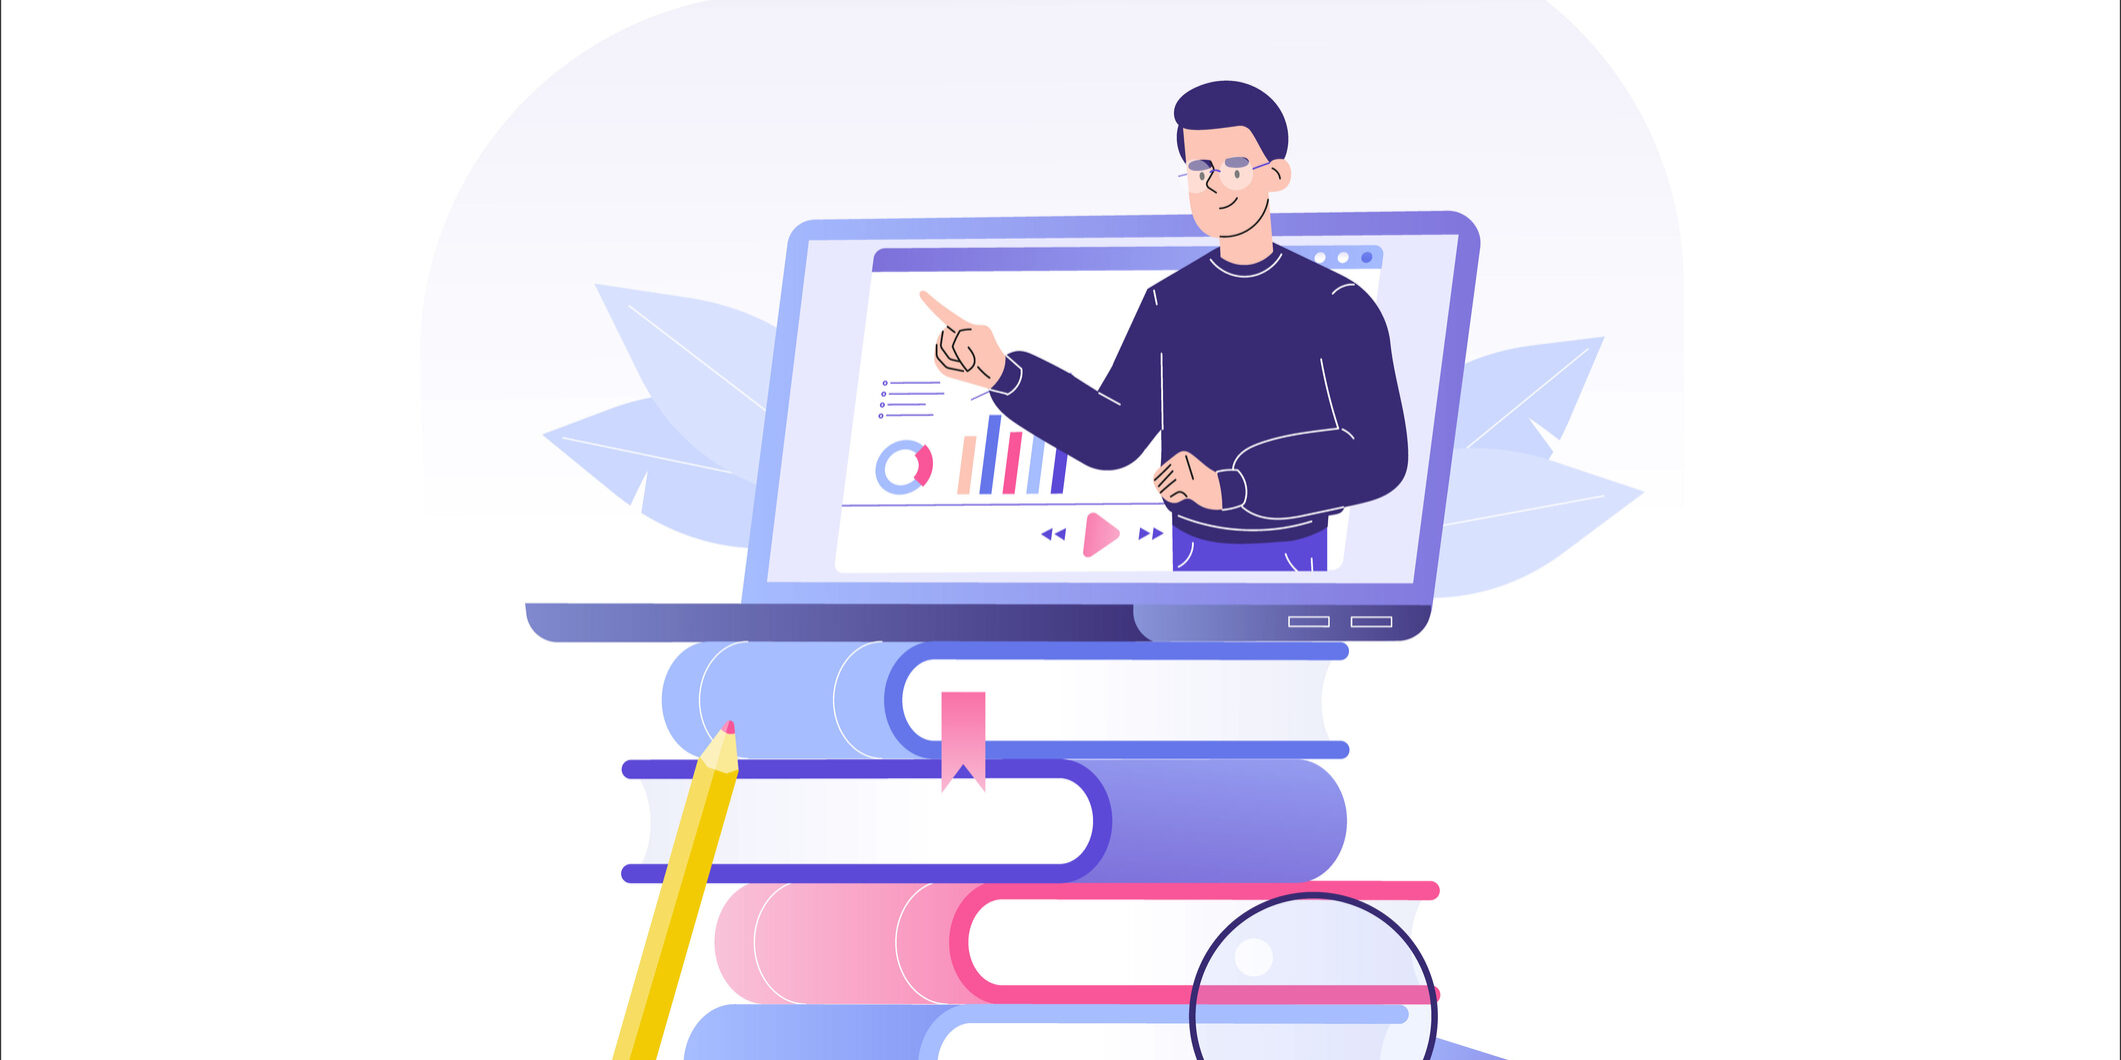 Online education or business training concept. Online man mentor on laptop with books. Distance education during coronavirus quarantine. Webinar or video seminar. E learning. Vector illustration